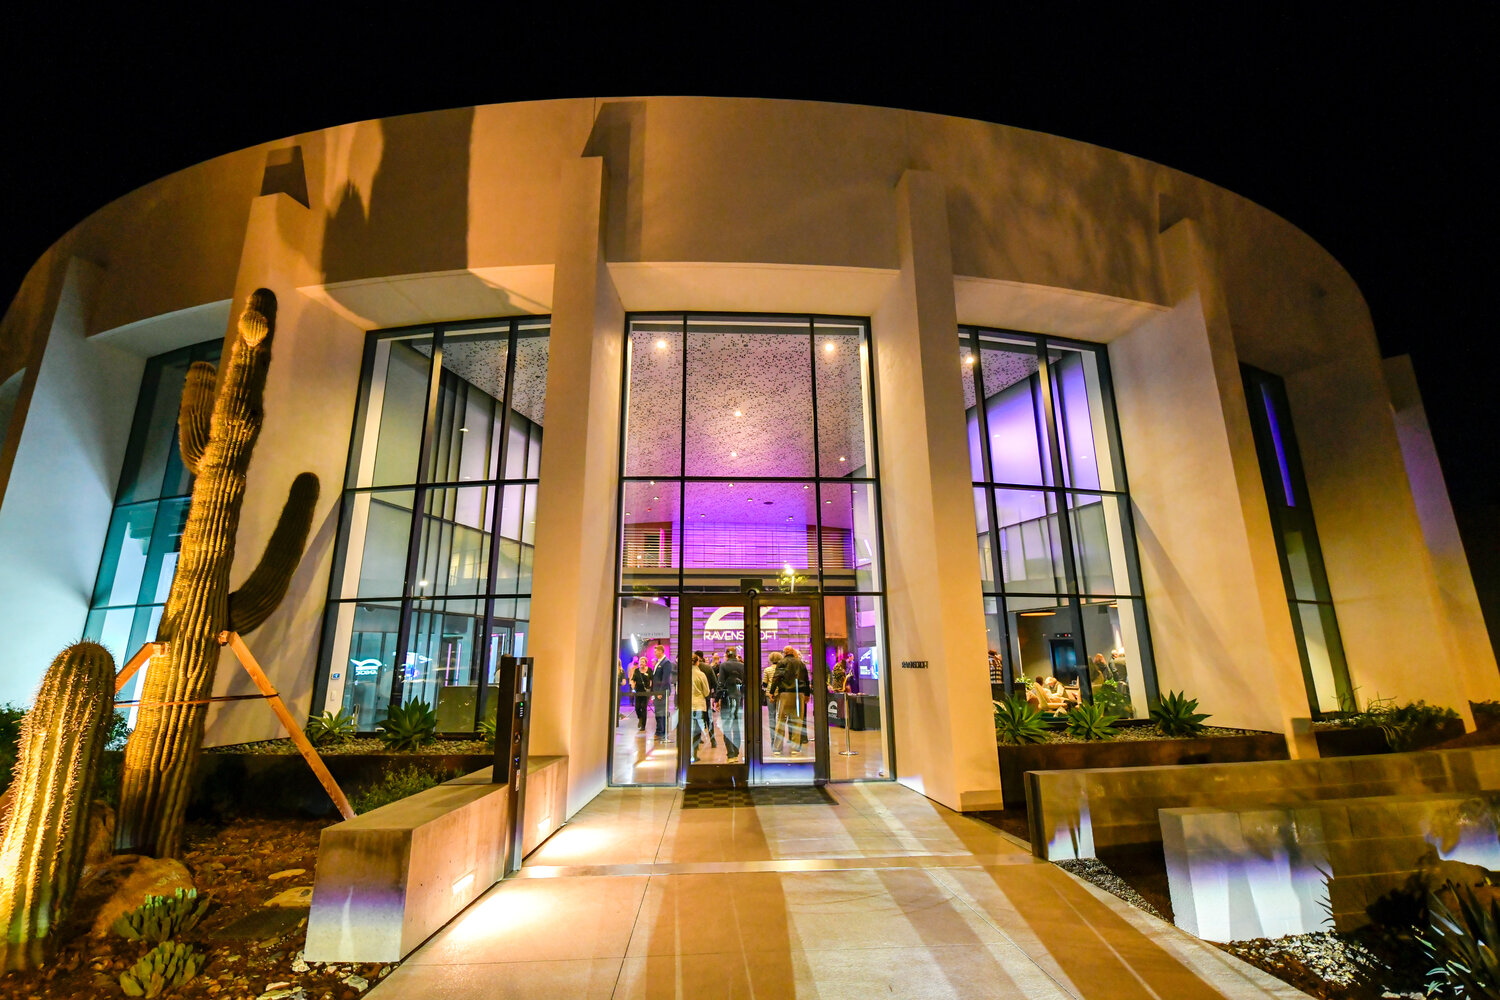 The Ravenscroft is a 30,000 square foot music venue and multi-use space. Their concert hall has an intimate setting with 200 seats and showcases world-renowned and Grammy-Award winning artists.